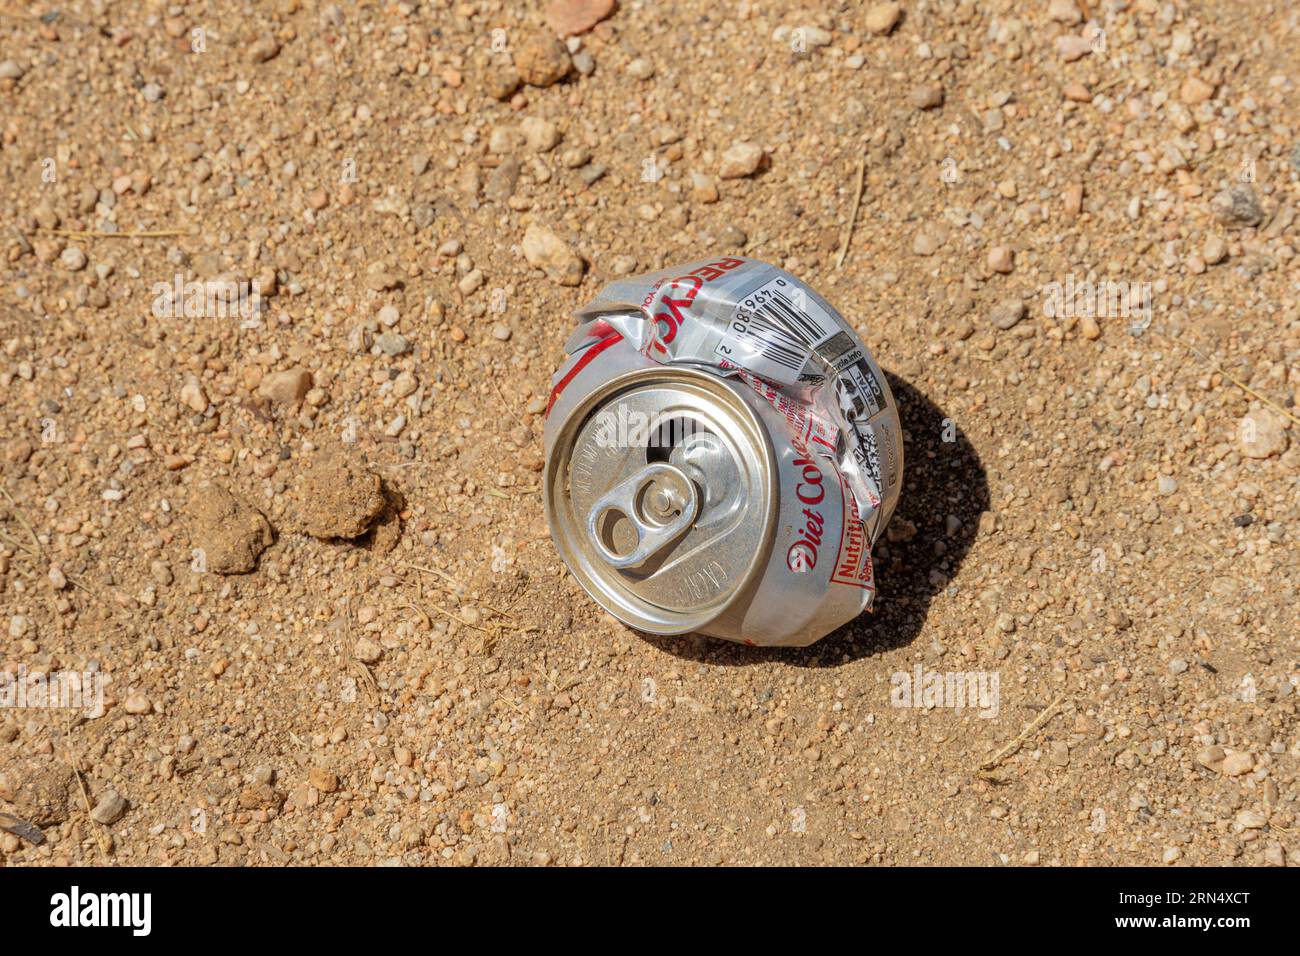 Victorville, CA, USA - July 27, 2023: A crushed aluminum soda can left on a sandy ground in the Mojave Desert. Stock Photo